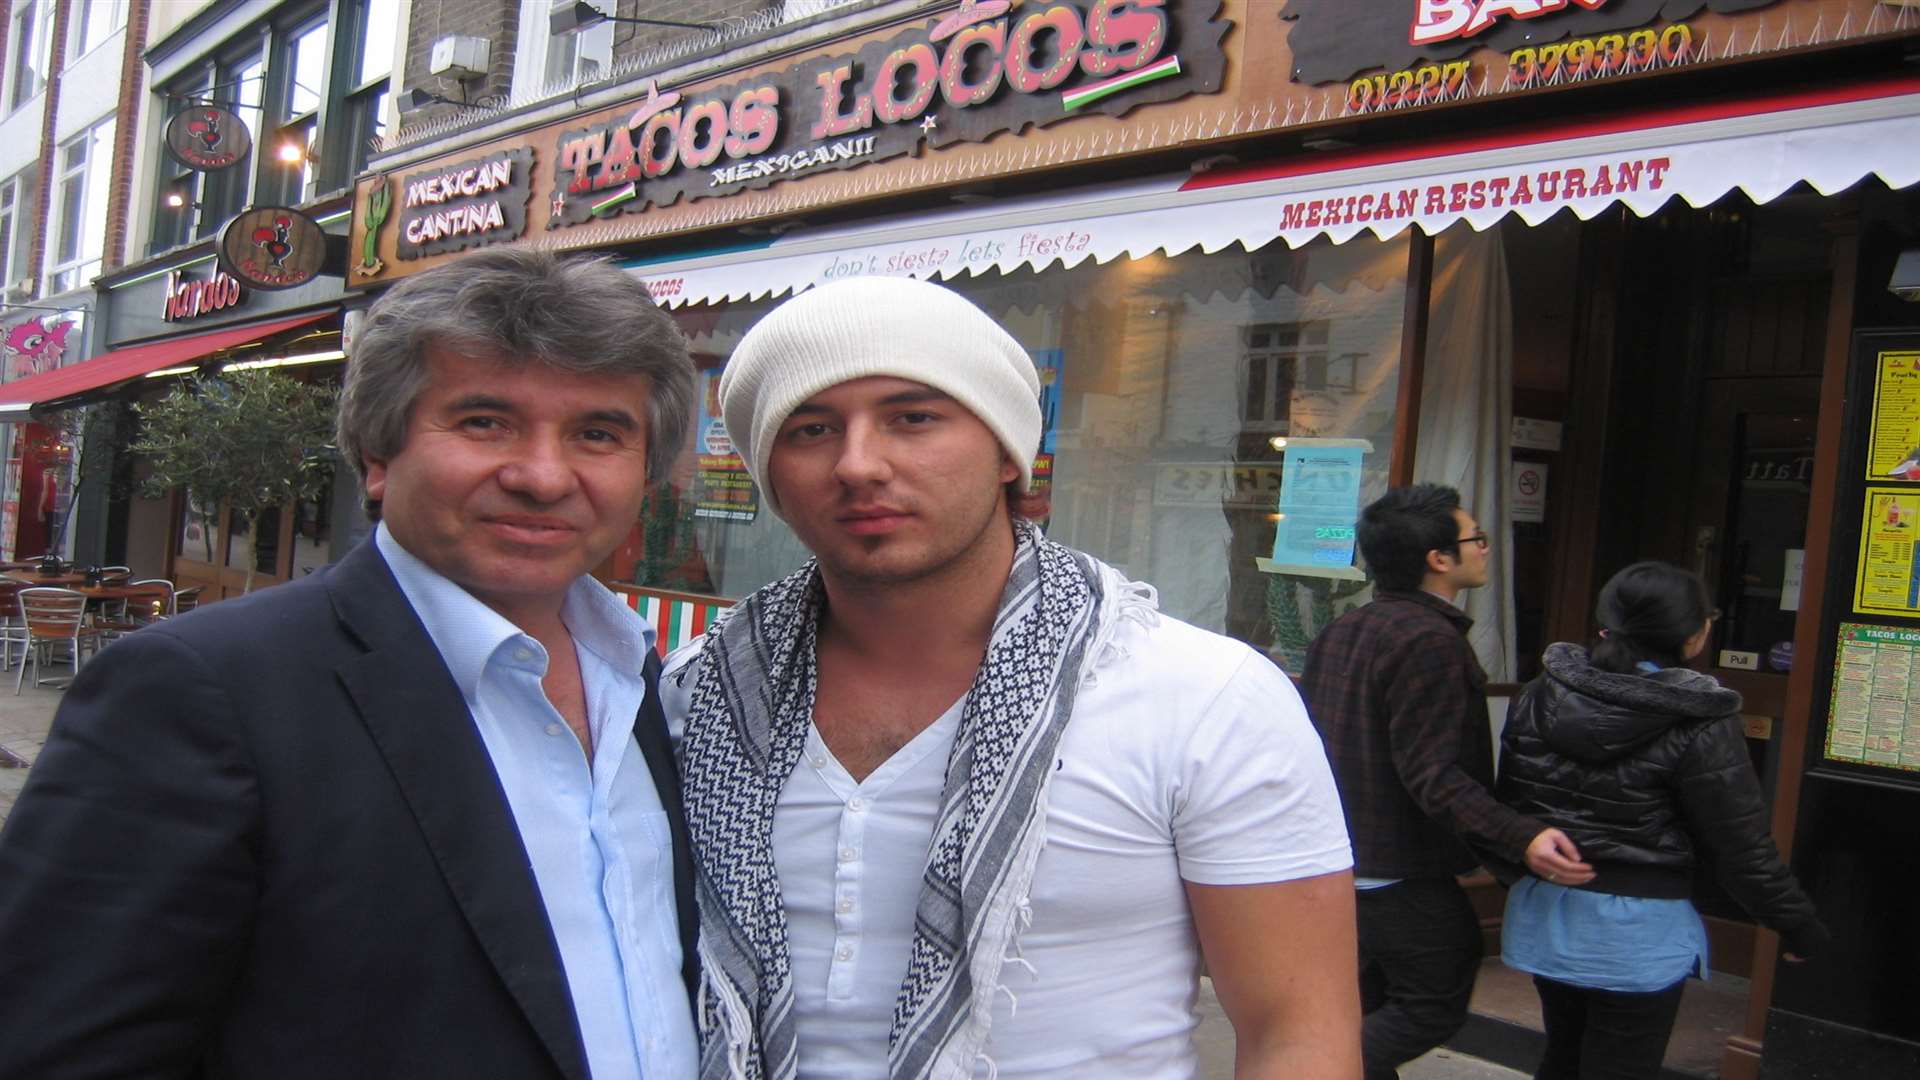 Musa Kivrak and his son Omer outside the new Tacos Locos restaurant in Canterbury